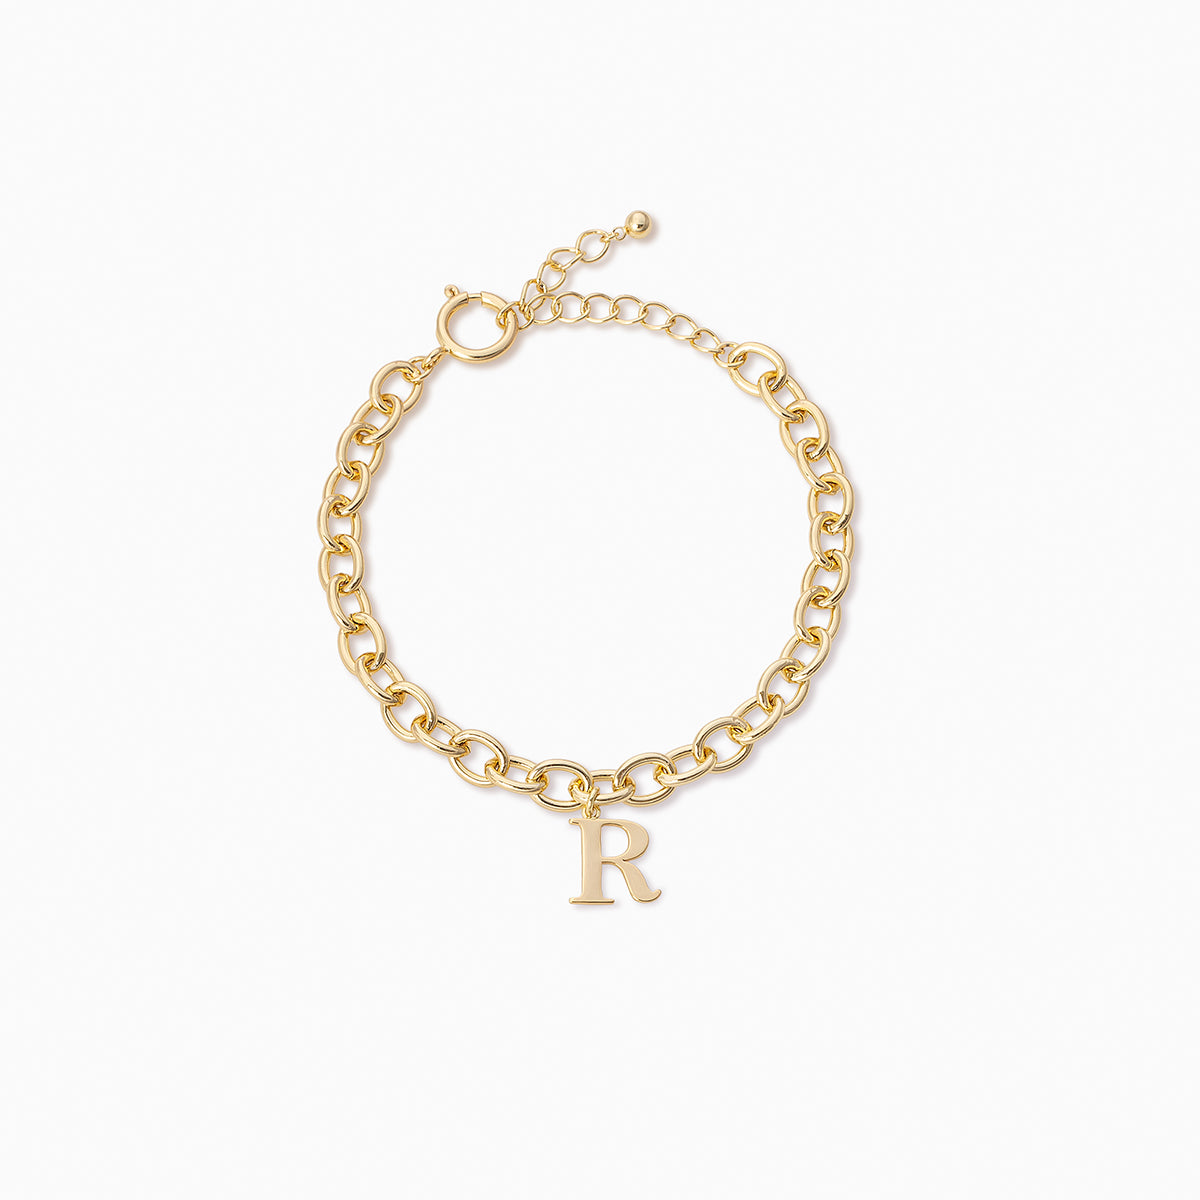 Gold Initial Remember Me Chain Bracelet with Letter R | Women's Jewelry by Uncommon James